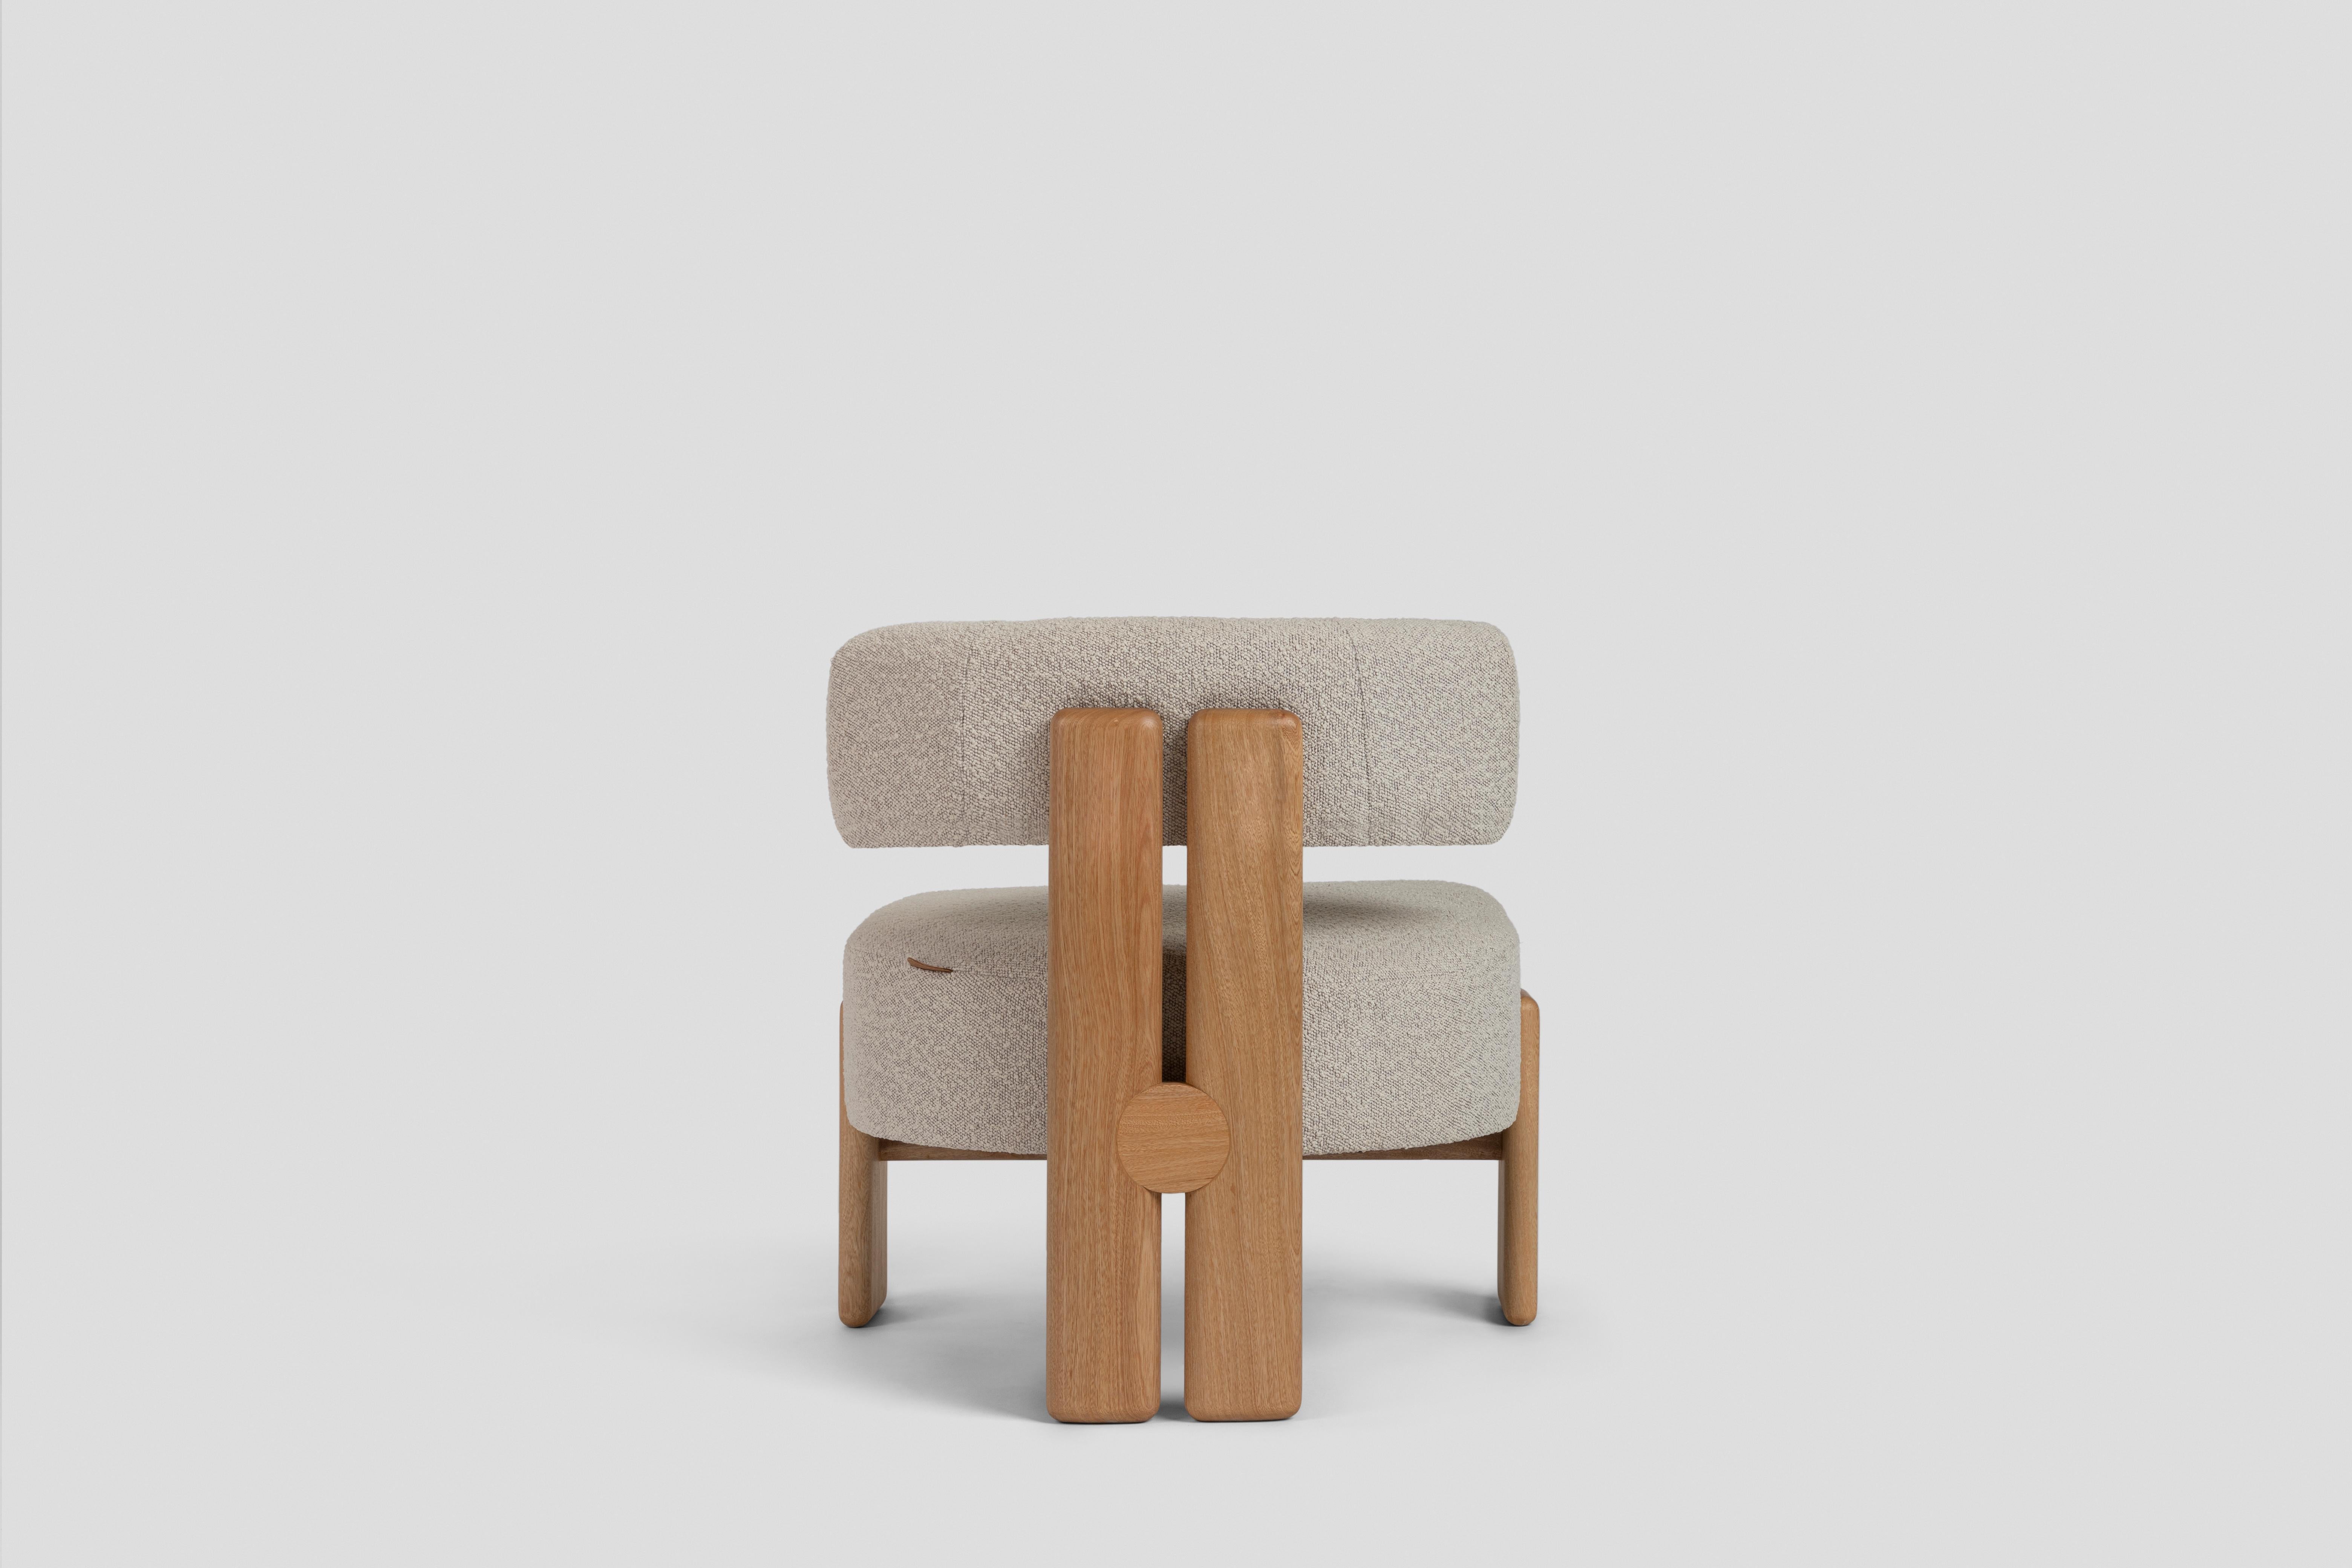 Inspired by three-legged chairs, this low chair has a back leg formed by two pieces joined by a circular wooden detail and two side legs that embrace the seat. It is intended to be a complement in a living room or an accent chair for a bedroom. It